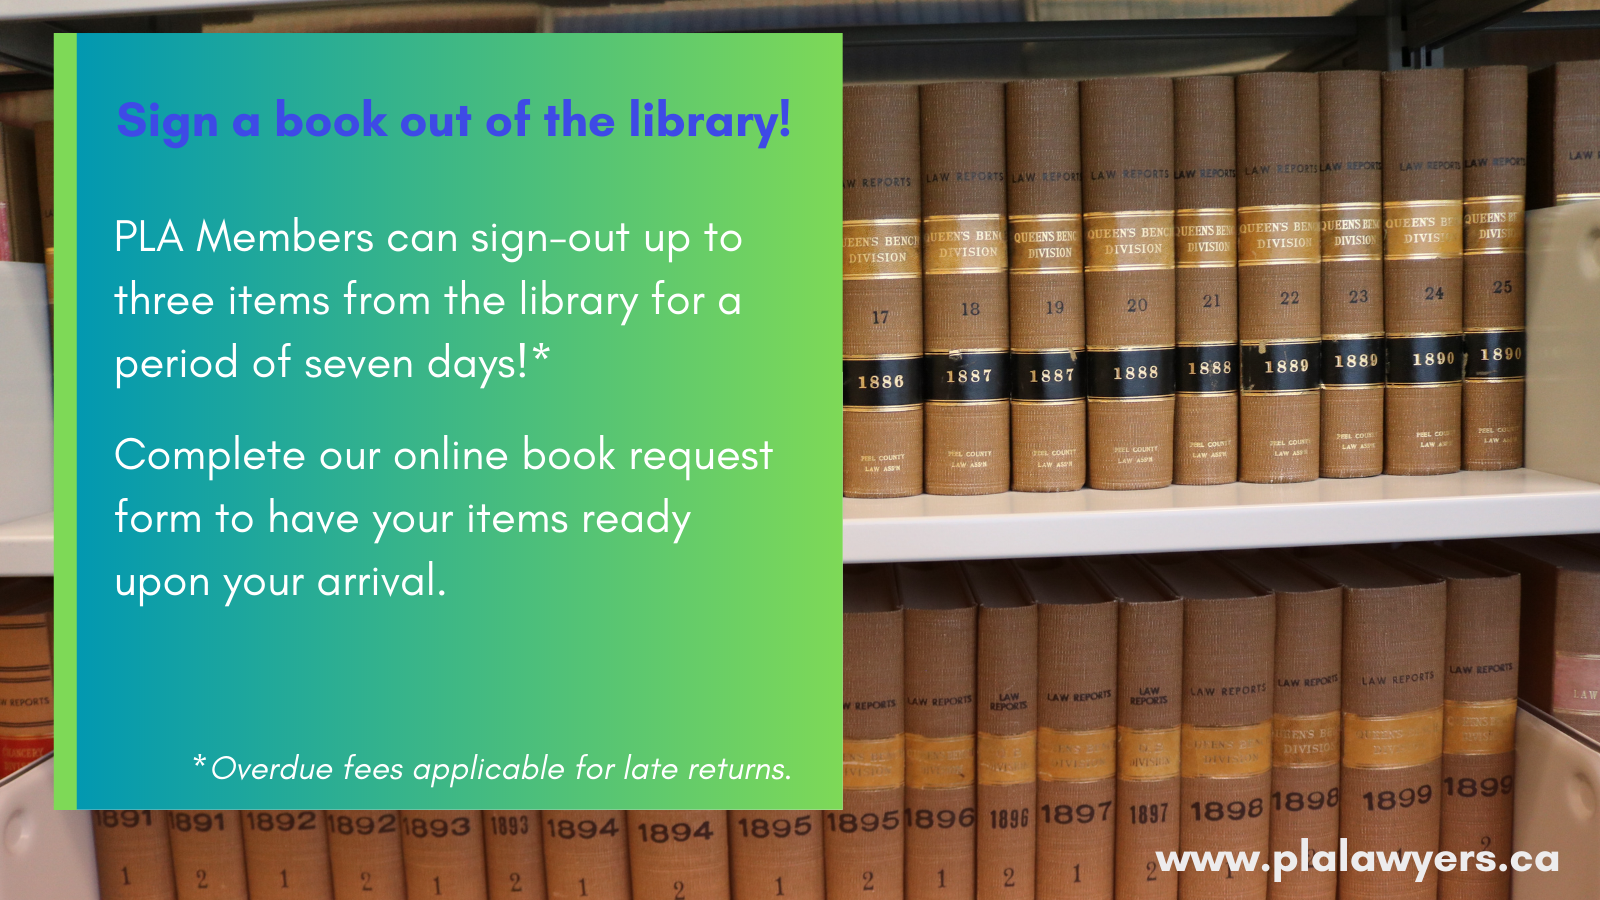 Sign books out from the library. PLA Members can sign-out up to three items from the library for a period of seven days! (Note: Overdue fees applicable for late late returns.)